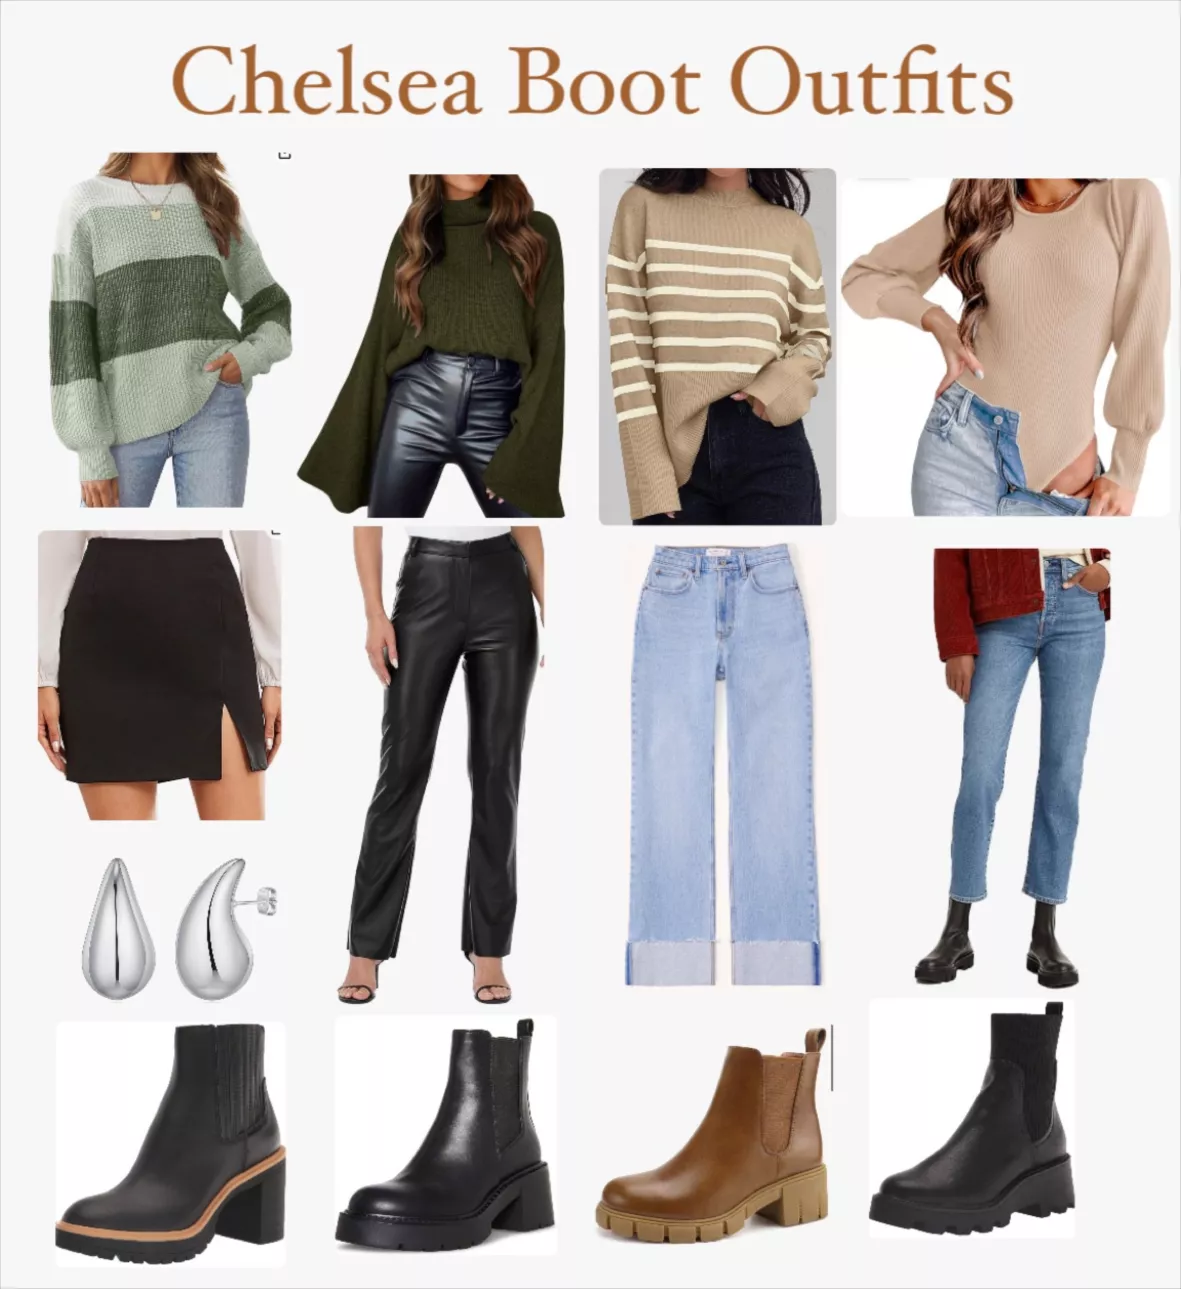 Black Dress Pants with Chelsea Boots Fall Outfits For Women (2